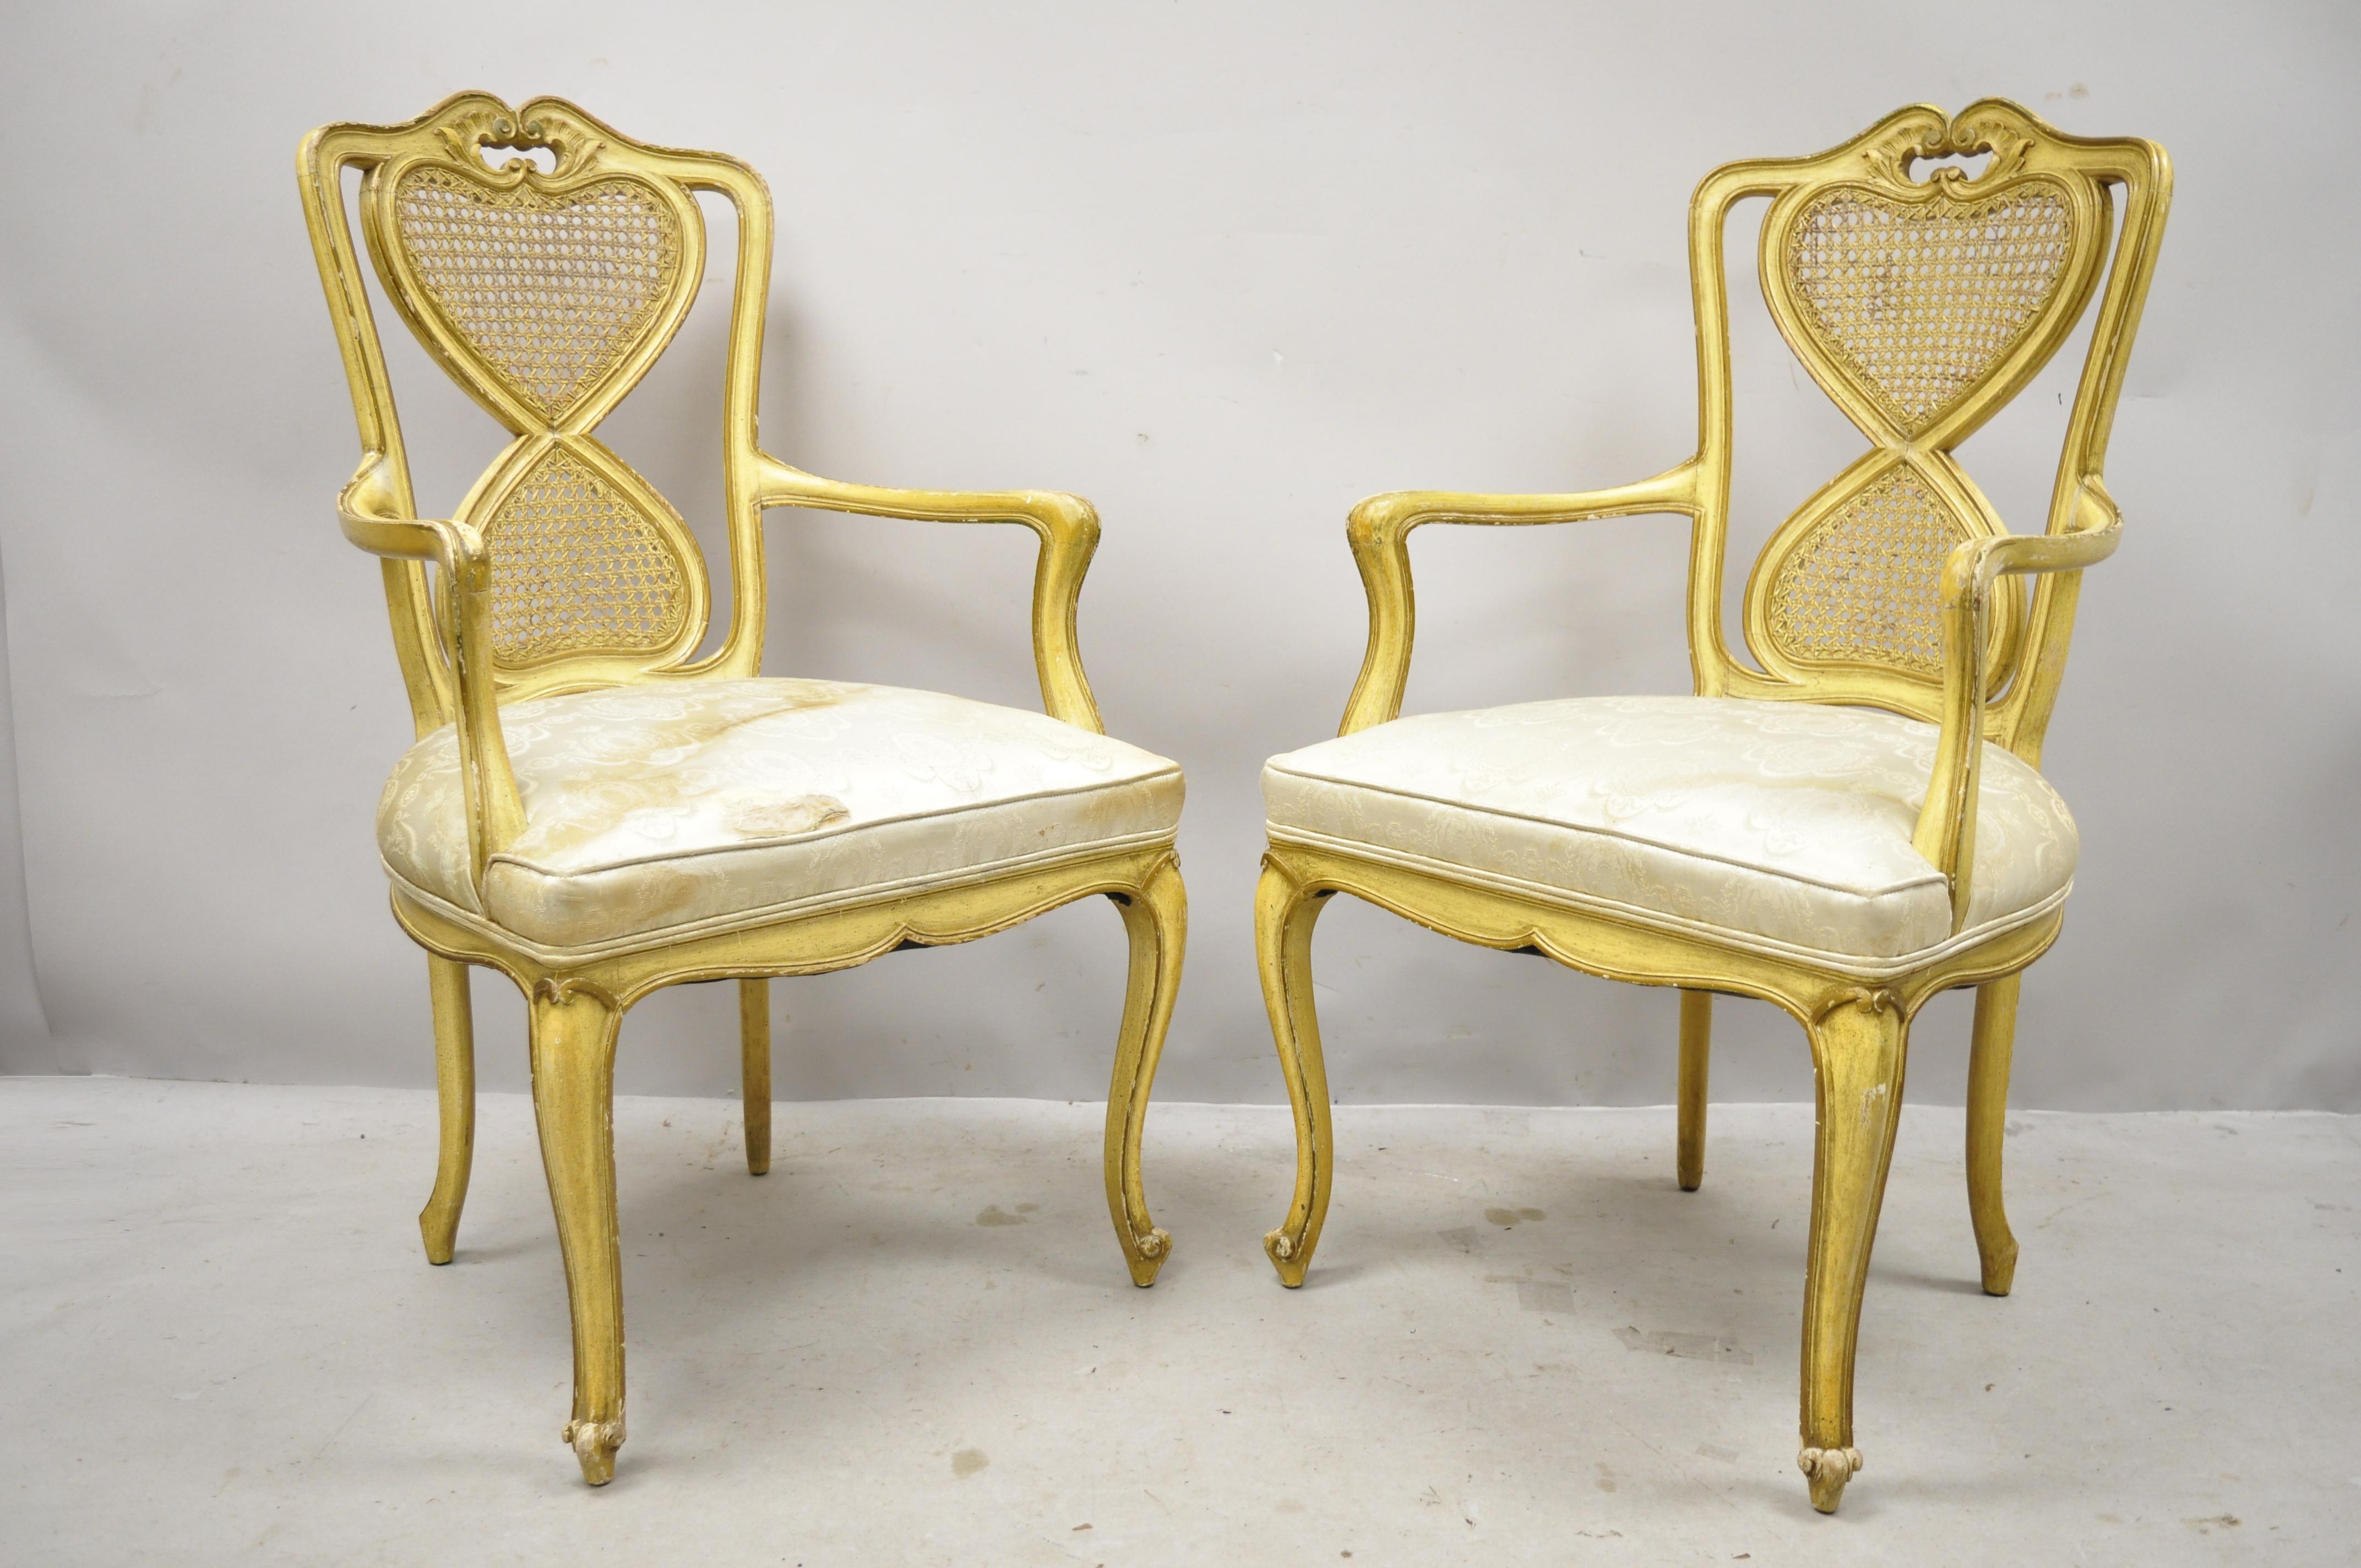 Vintage Italian Provincial French Louis XV yellow cane back dining armchairs. Item features cane backs, solid wood frame, distressed finish, cabriole legs, quality craftsmanship, great style and form, circa early to mid-20th century. Measurements: